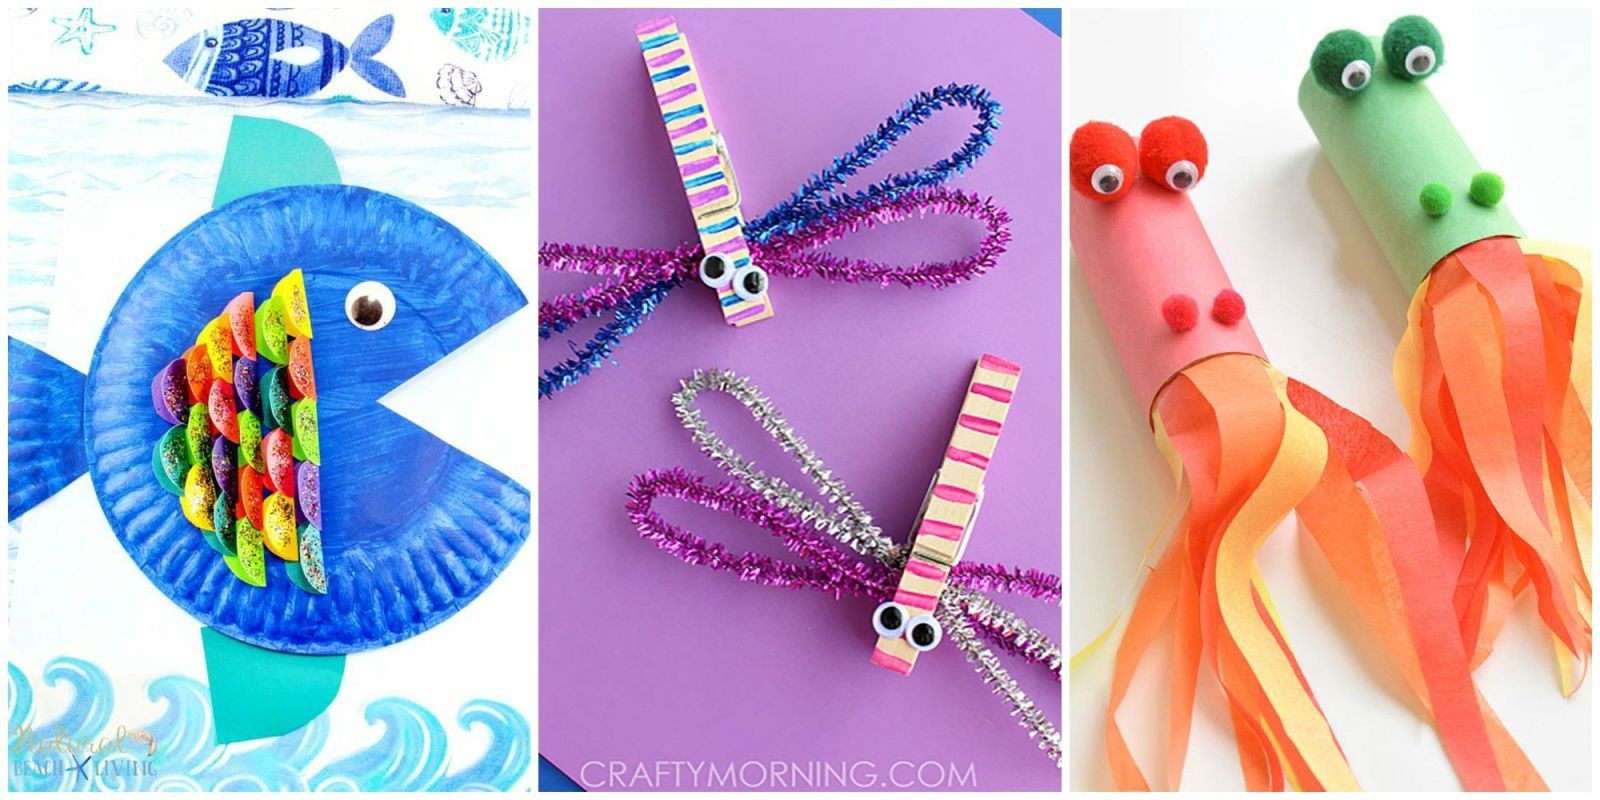 Simple Projects For Kids
 10 Easy Crafts For Kids That Will Brighten Up Rainy Days